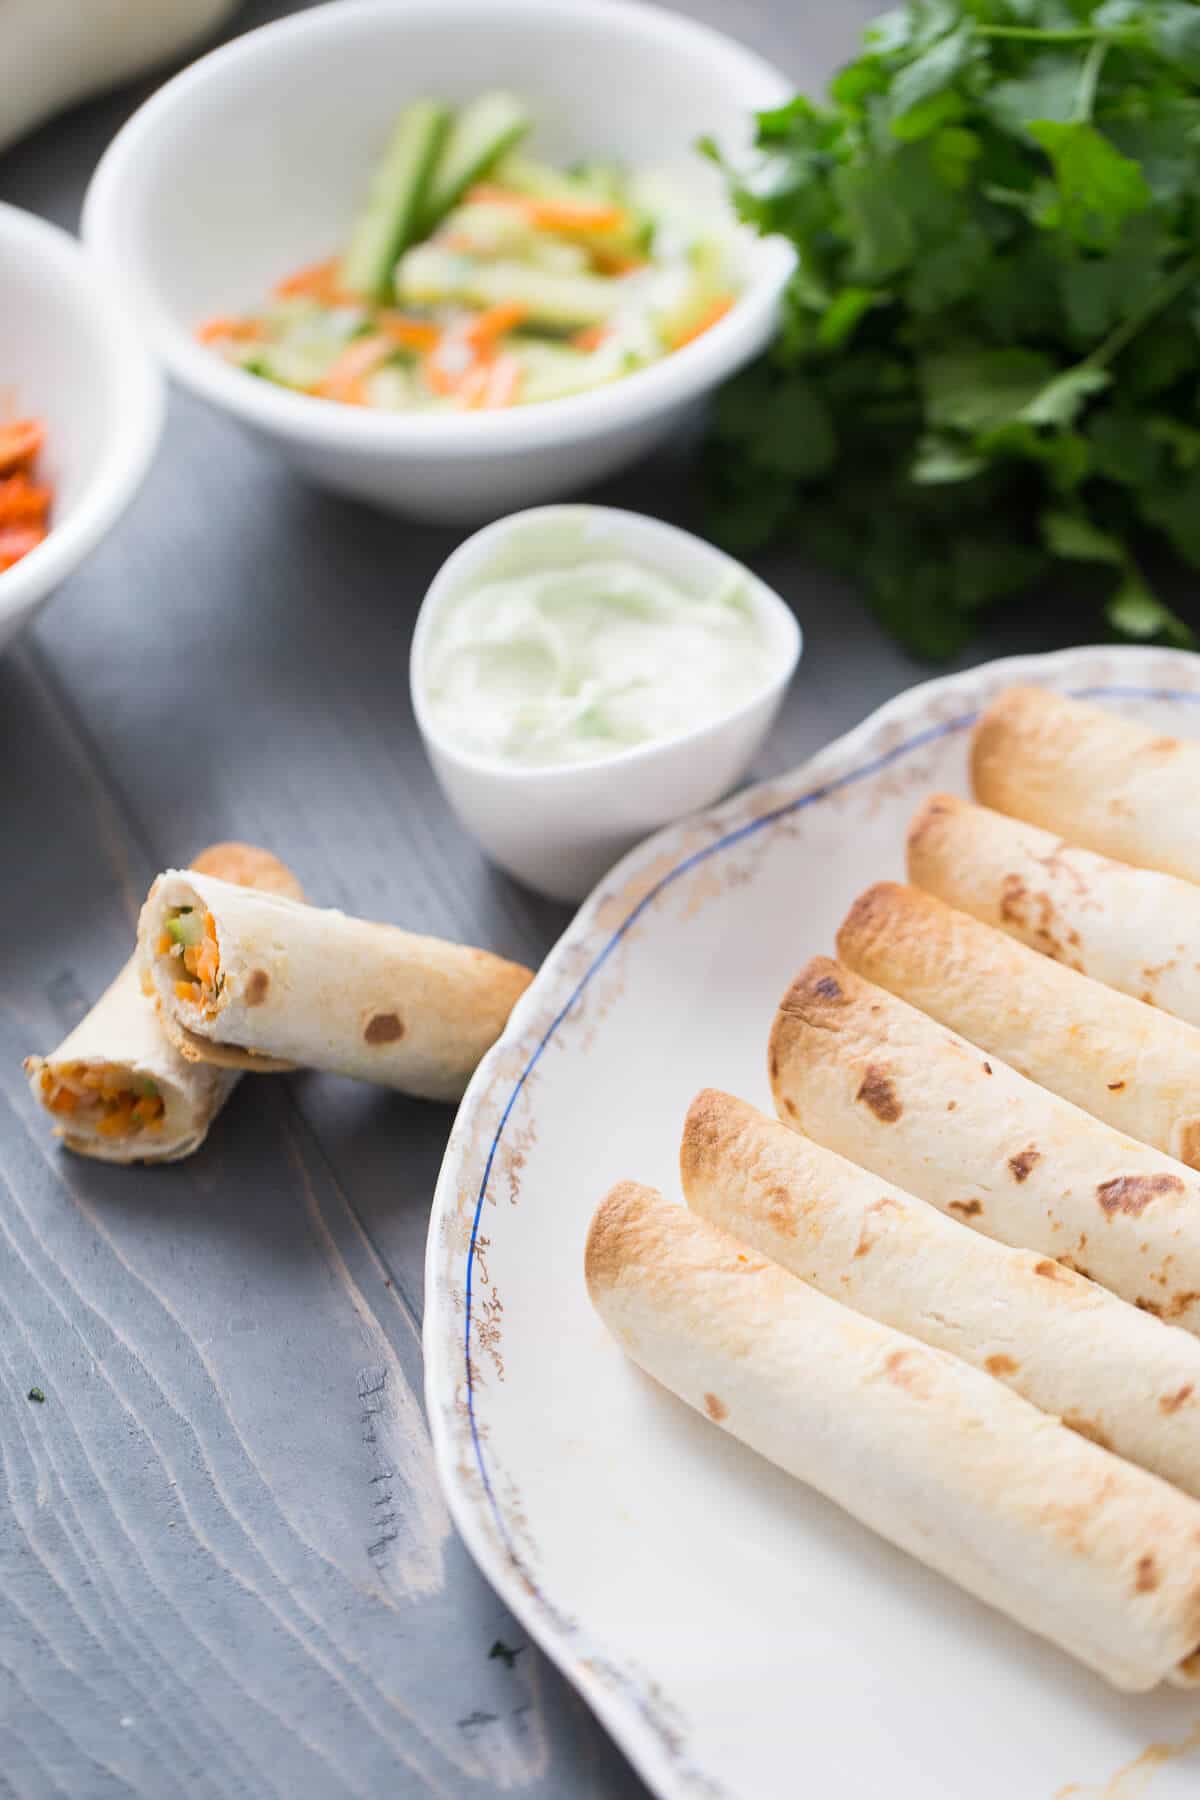 These Bahn Mi Taquitos are so good! The salmon and the veggies make them irresistable!